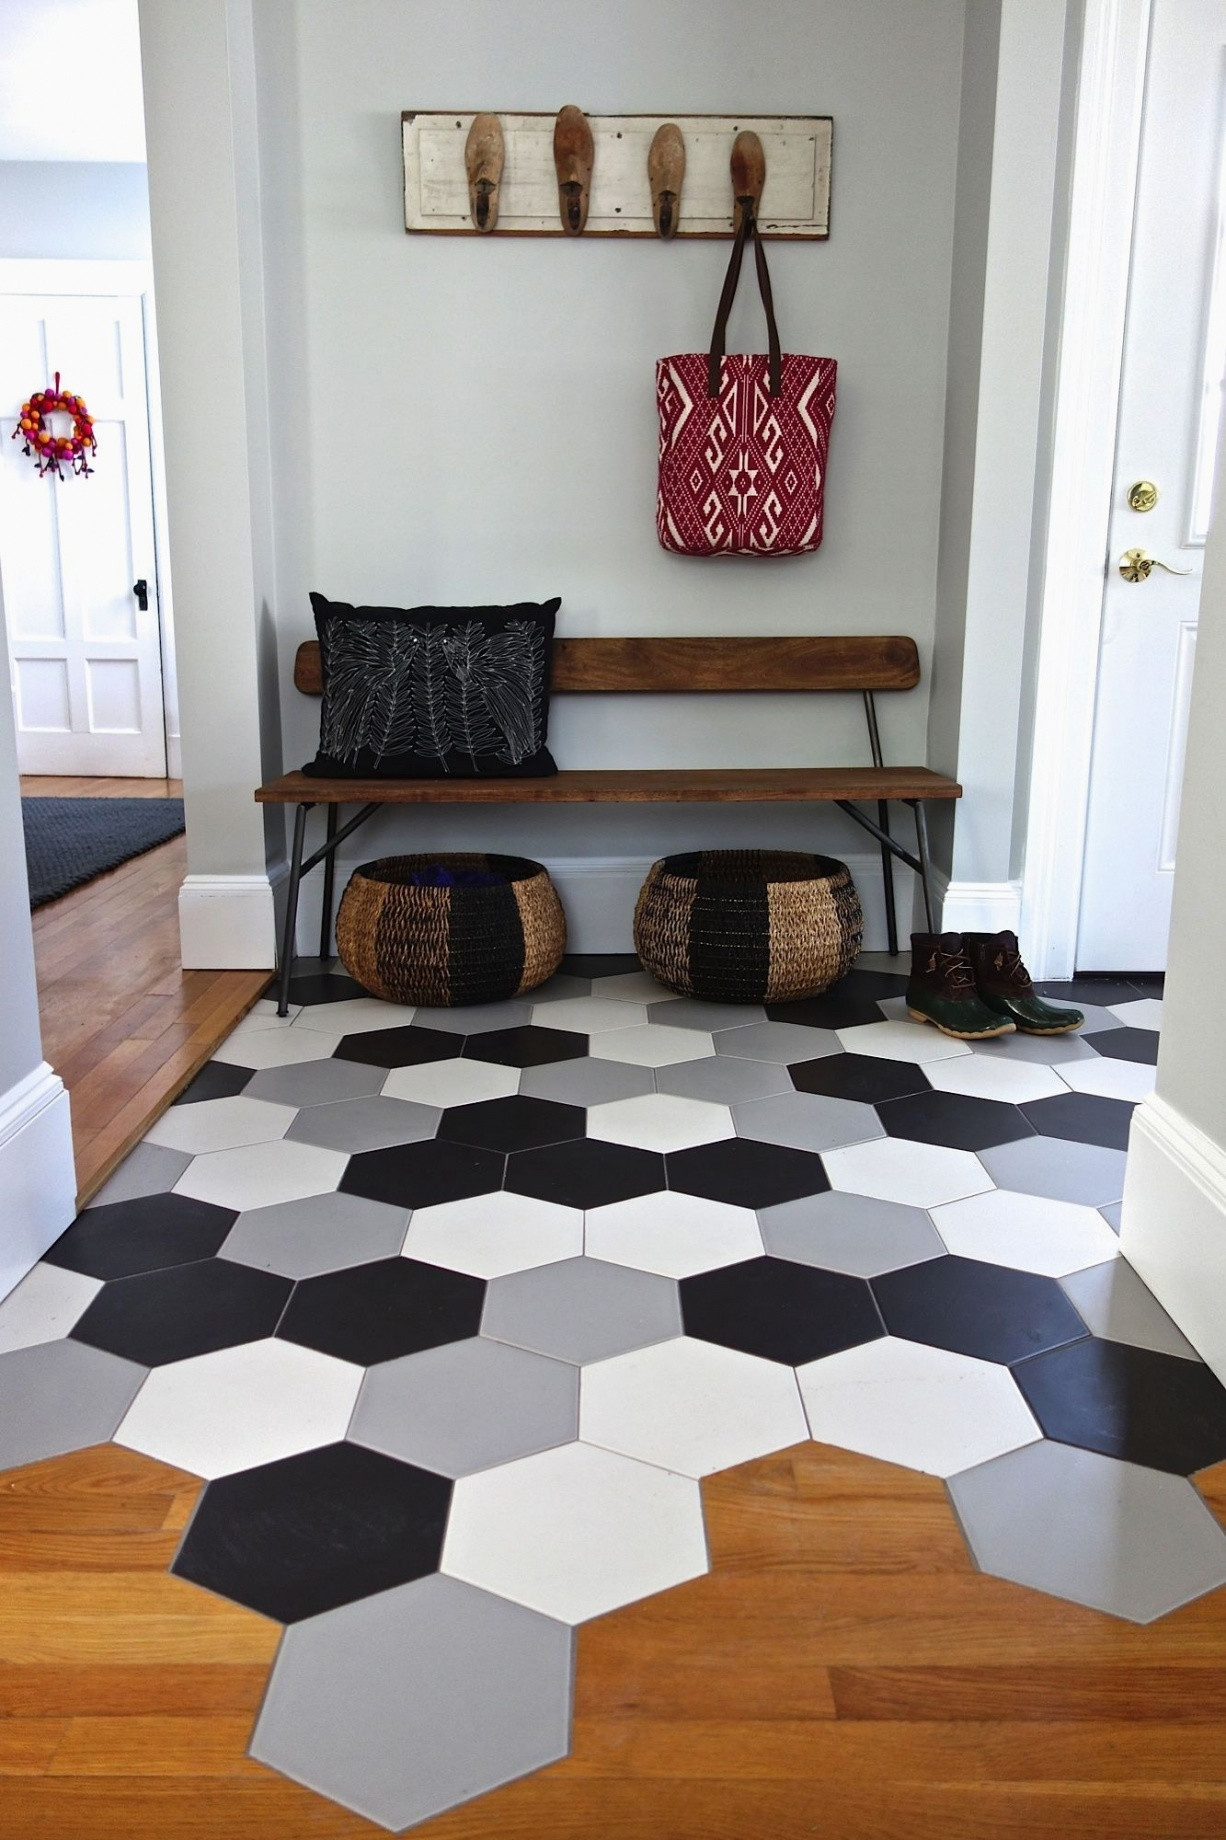 30 attractive Hardwood Floor Decorating Ideas 2024 free download hardwood floor decorating ideas of kitchen light cover best 1 kirkland wall decor home design 0d design in transition from wood to tile exclusive hex tile mudroom withpictures